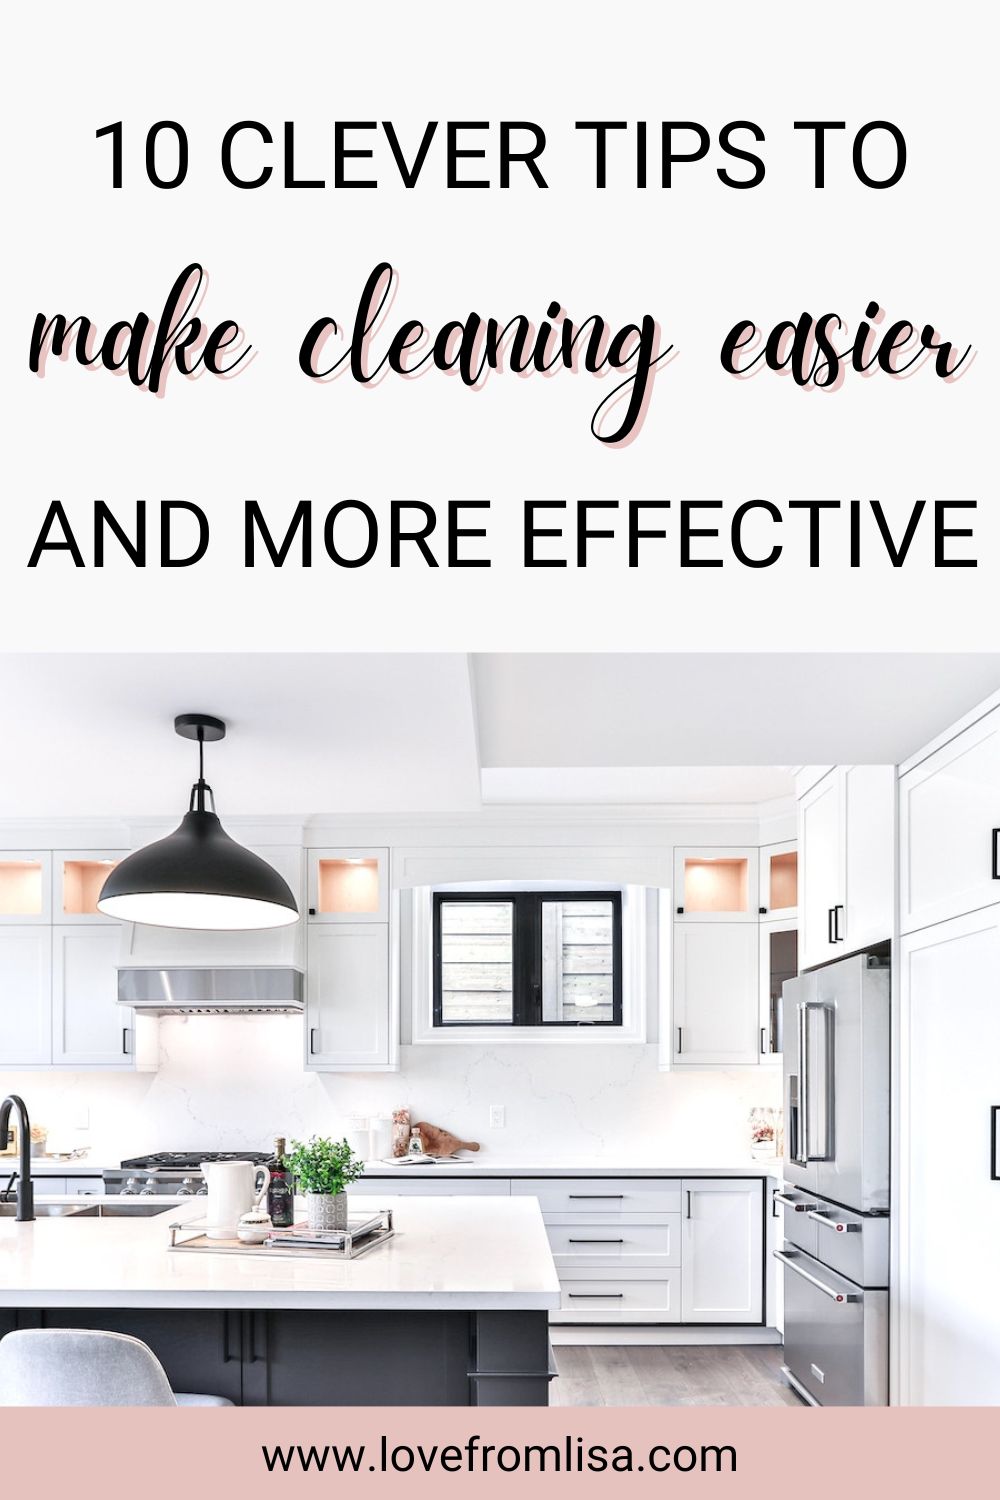 10 clever tips to make cleaning easier and more effective Pinterest graphic